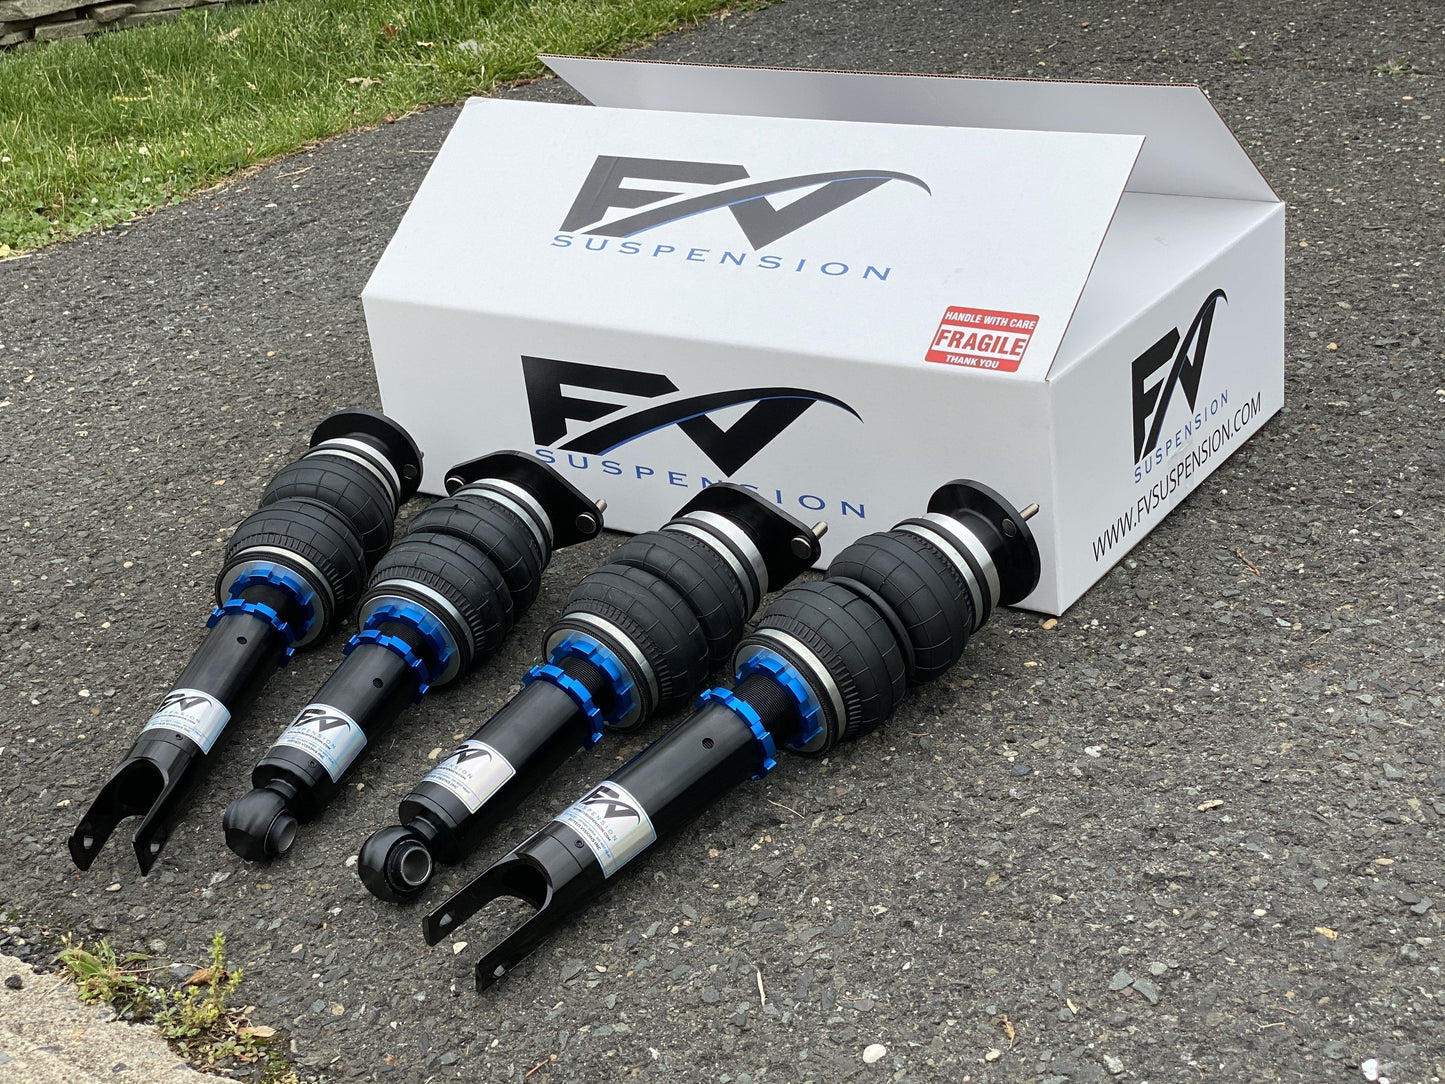 FV Suspension 3H Tier 3 Complete Air Ride kit for 05-12 BMW 3 Series Touring - FVALtier3kit87